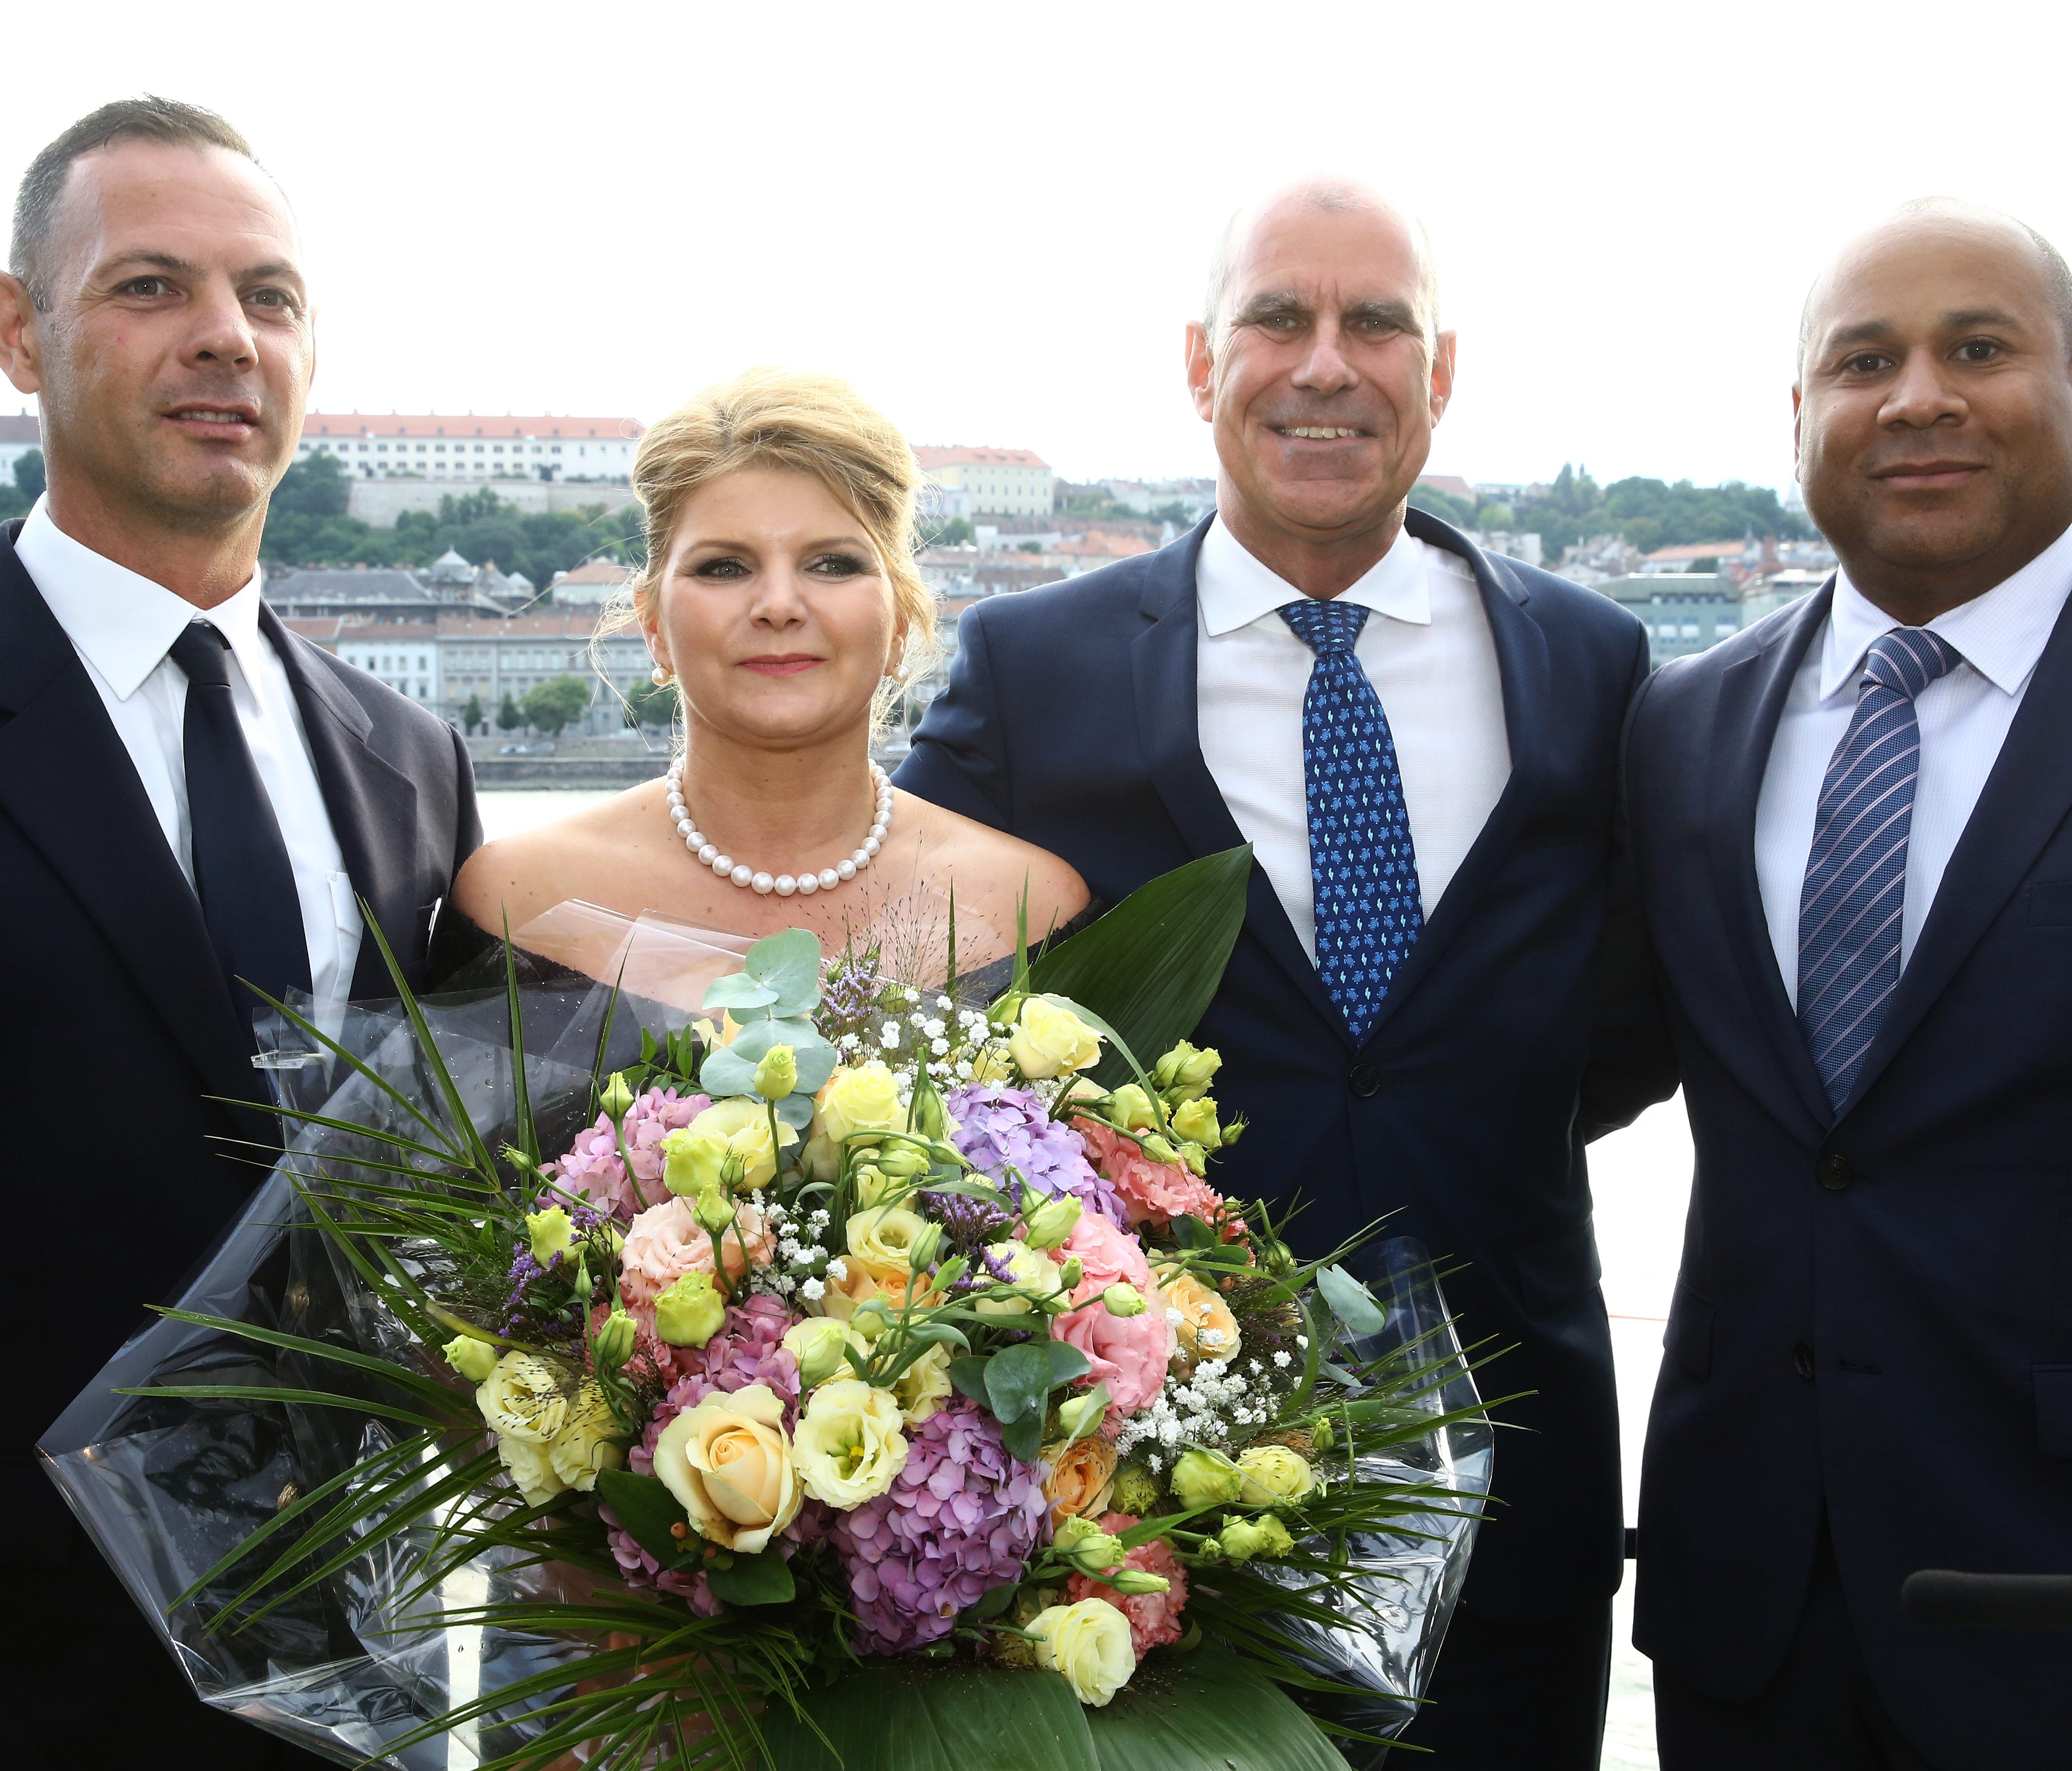 Crystal Ravel godmother Mariann Peller wth Crystal Cruises president and CEO Tom Wolber (center right) and Crystal River Cruises vice president and managing director Walter Littlejohn (right) at the christening of Crystal Ravel.